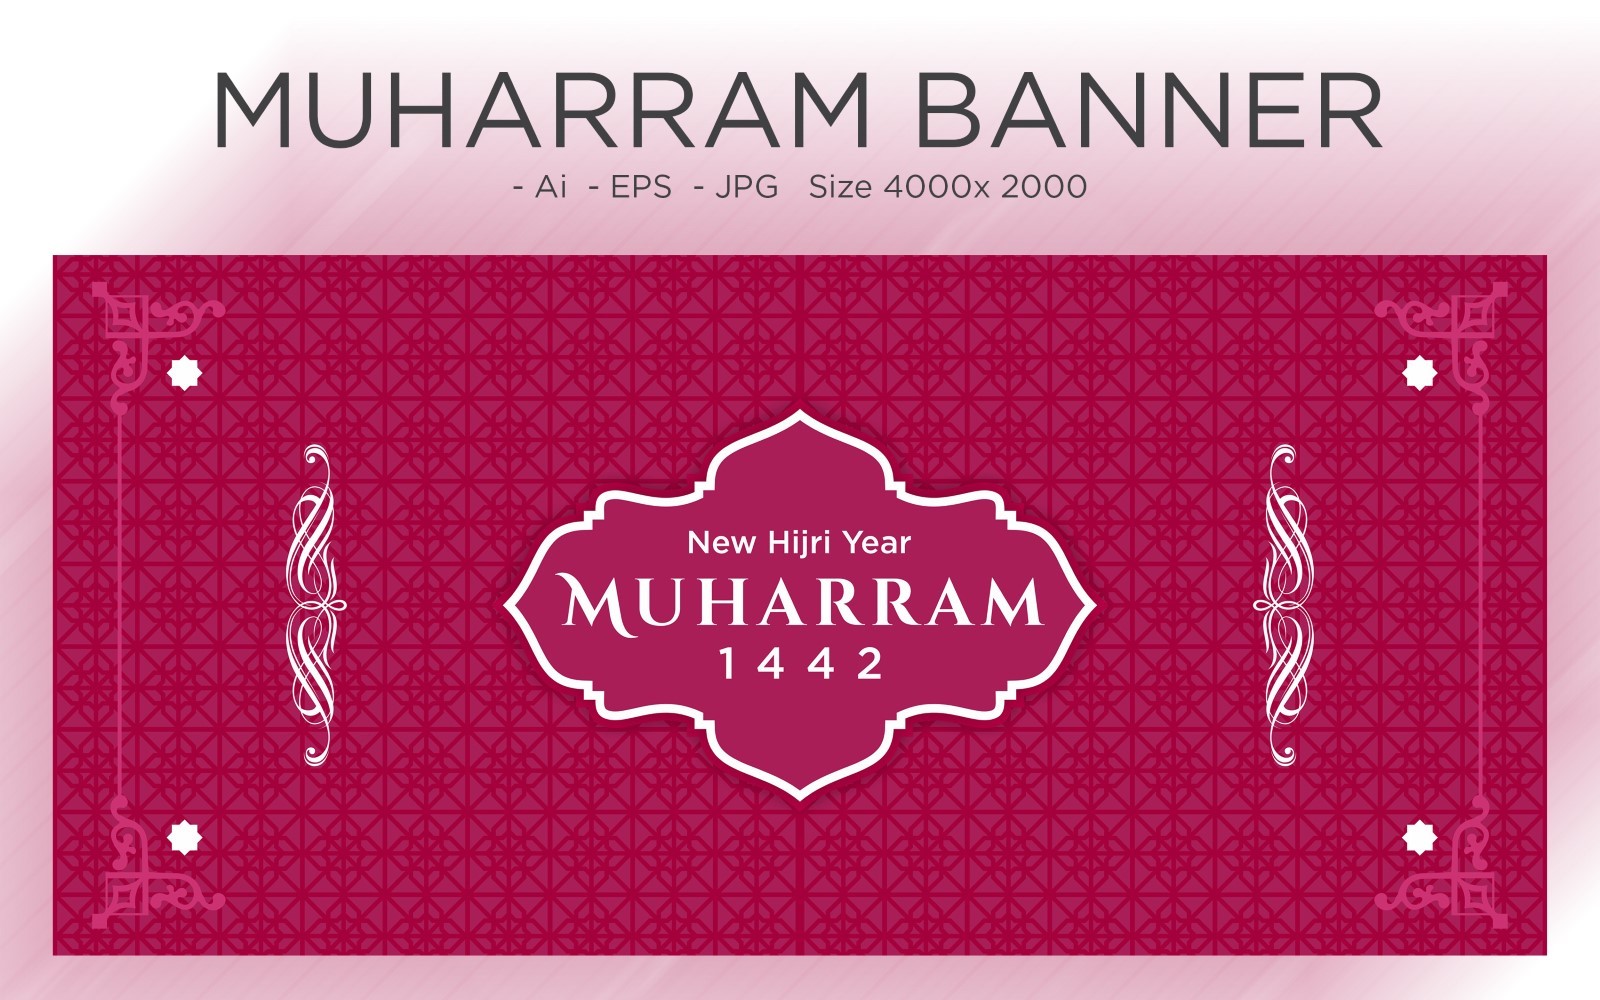 Muslim Islamic New Year Festival Banner with Patterns - Illustration